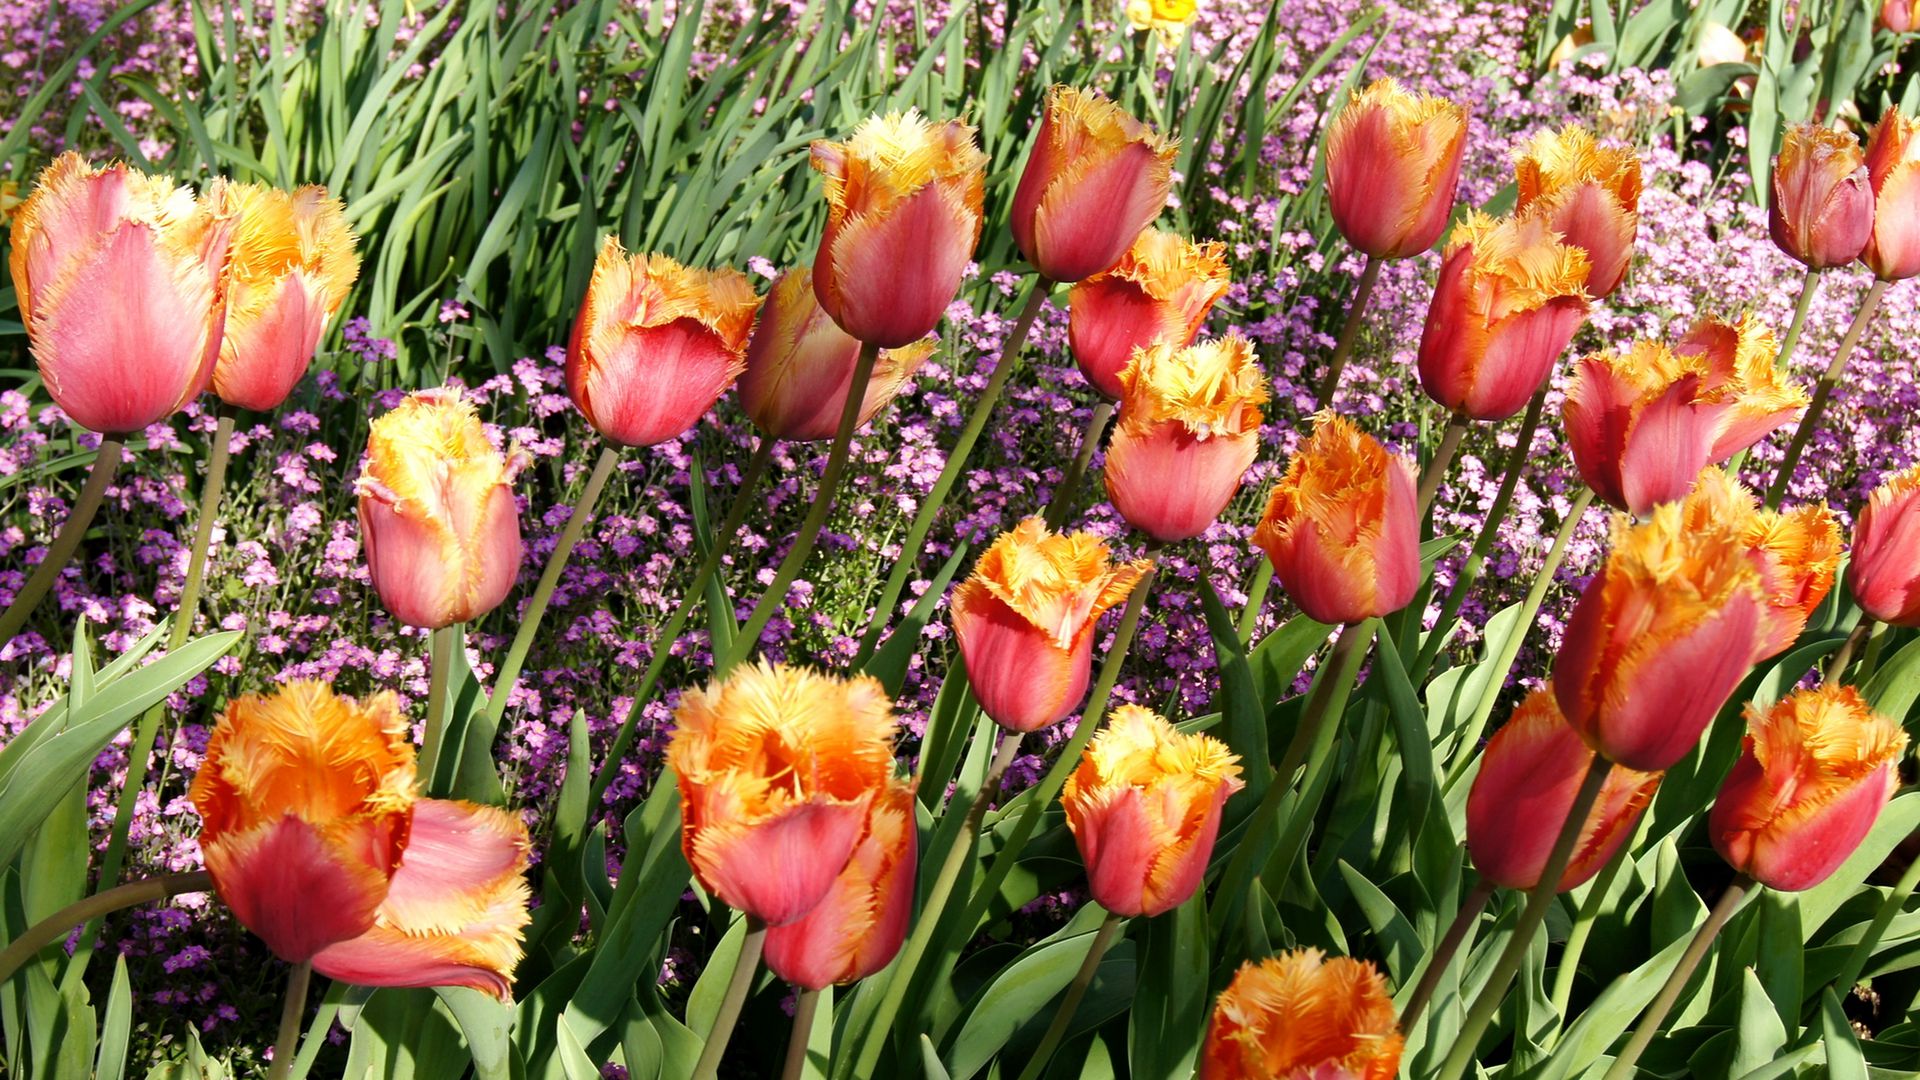 Download wallpaper 1920x1080 tulips, double, flowers, flowerbed, spring ...